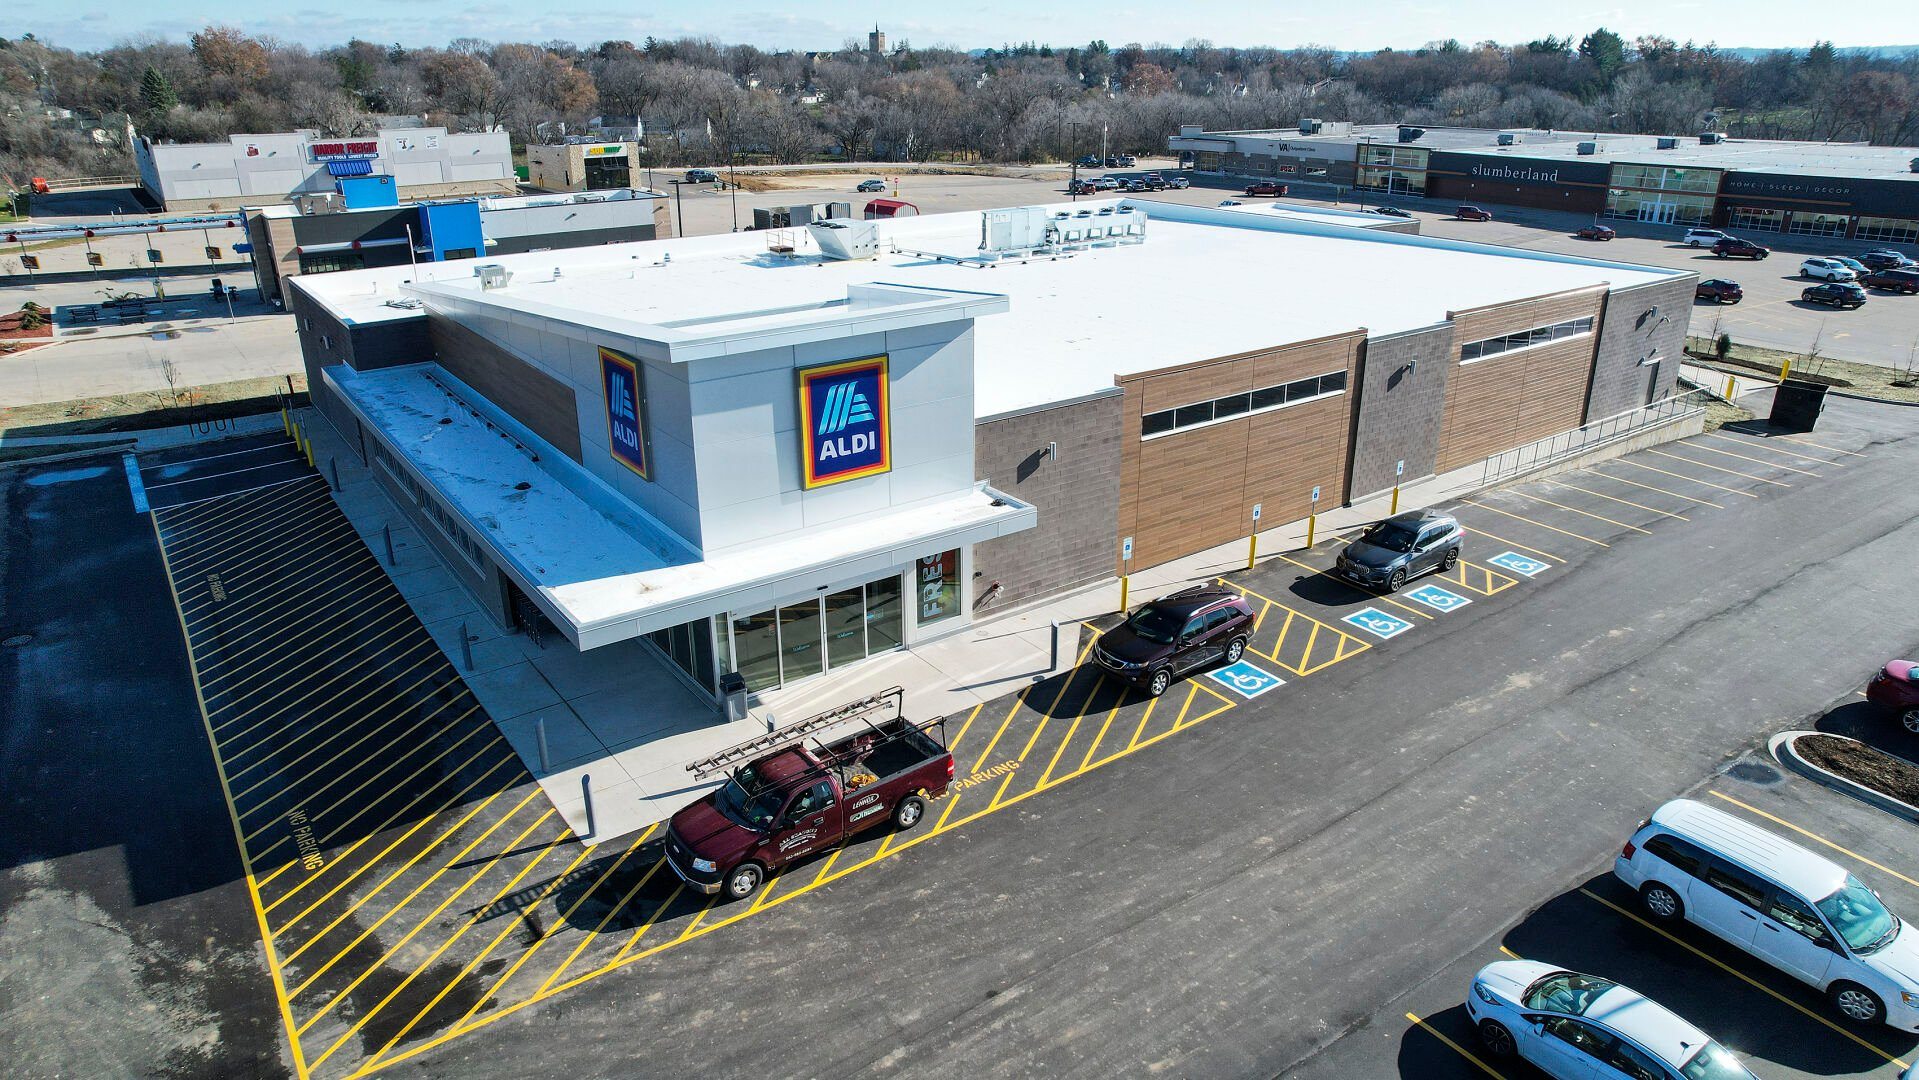 Aldi recently opened another Dubuque store, in Plaza 20.    PHOTO CREDIT: Dave Kettering
Telegraph Herald